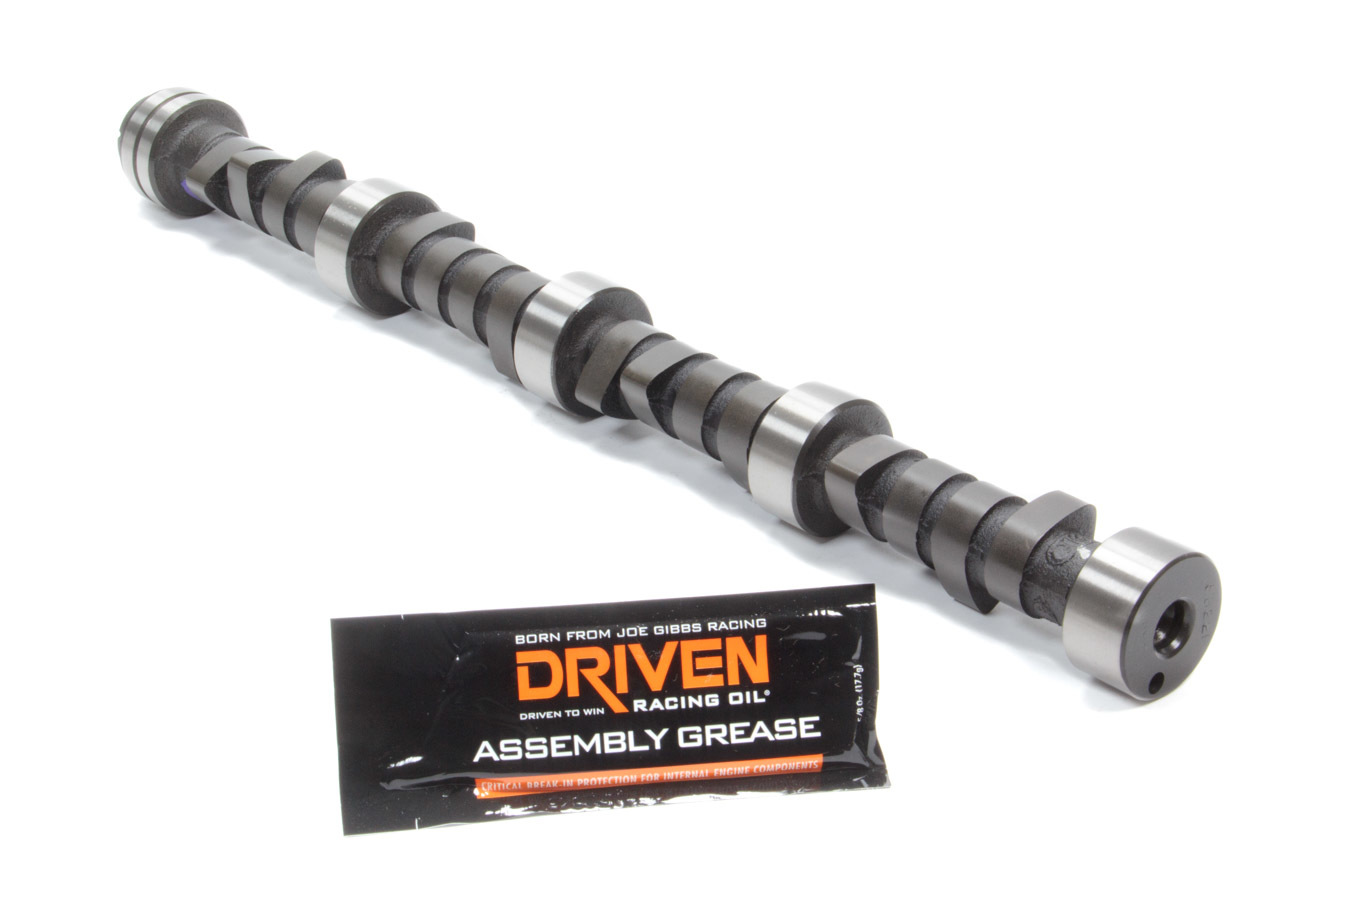 Crower Cams 53229 Camshaft, Compu-Pro, Hydraulic Flat Tappet, Lift 0.430 / 0.446 in, Duration 258 / 260, 112 LSA, 1500 / 4000 RPM, Small Block Buick / Rover V8, Each